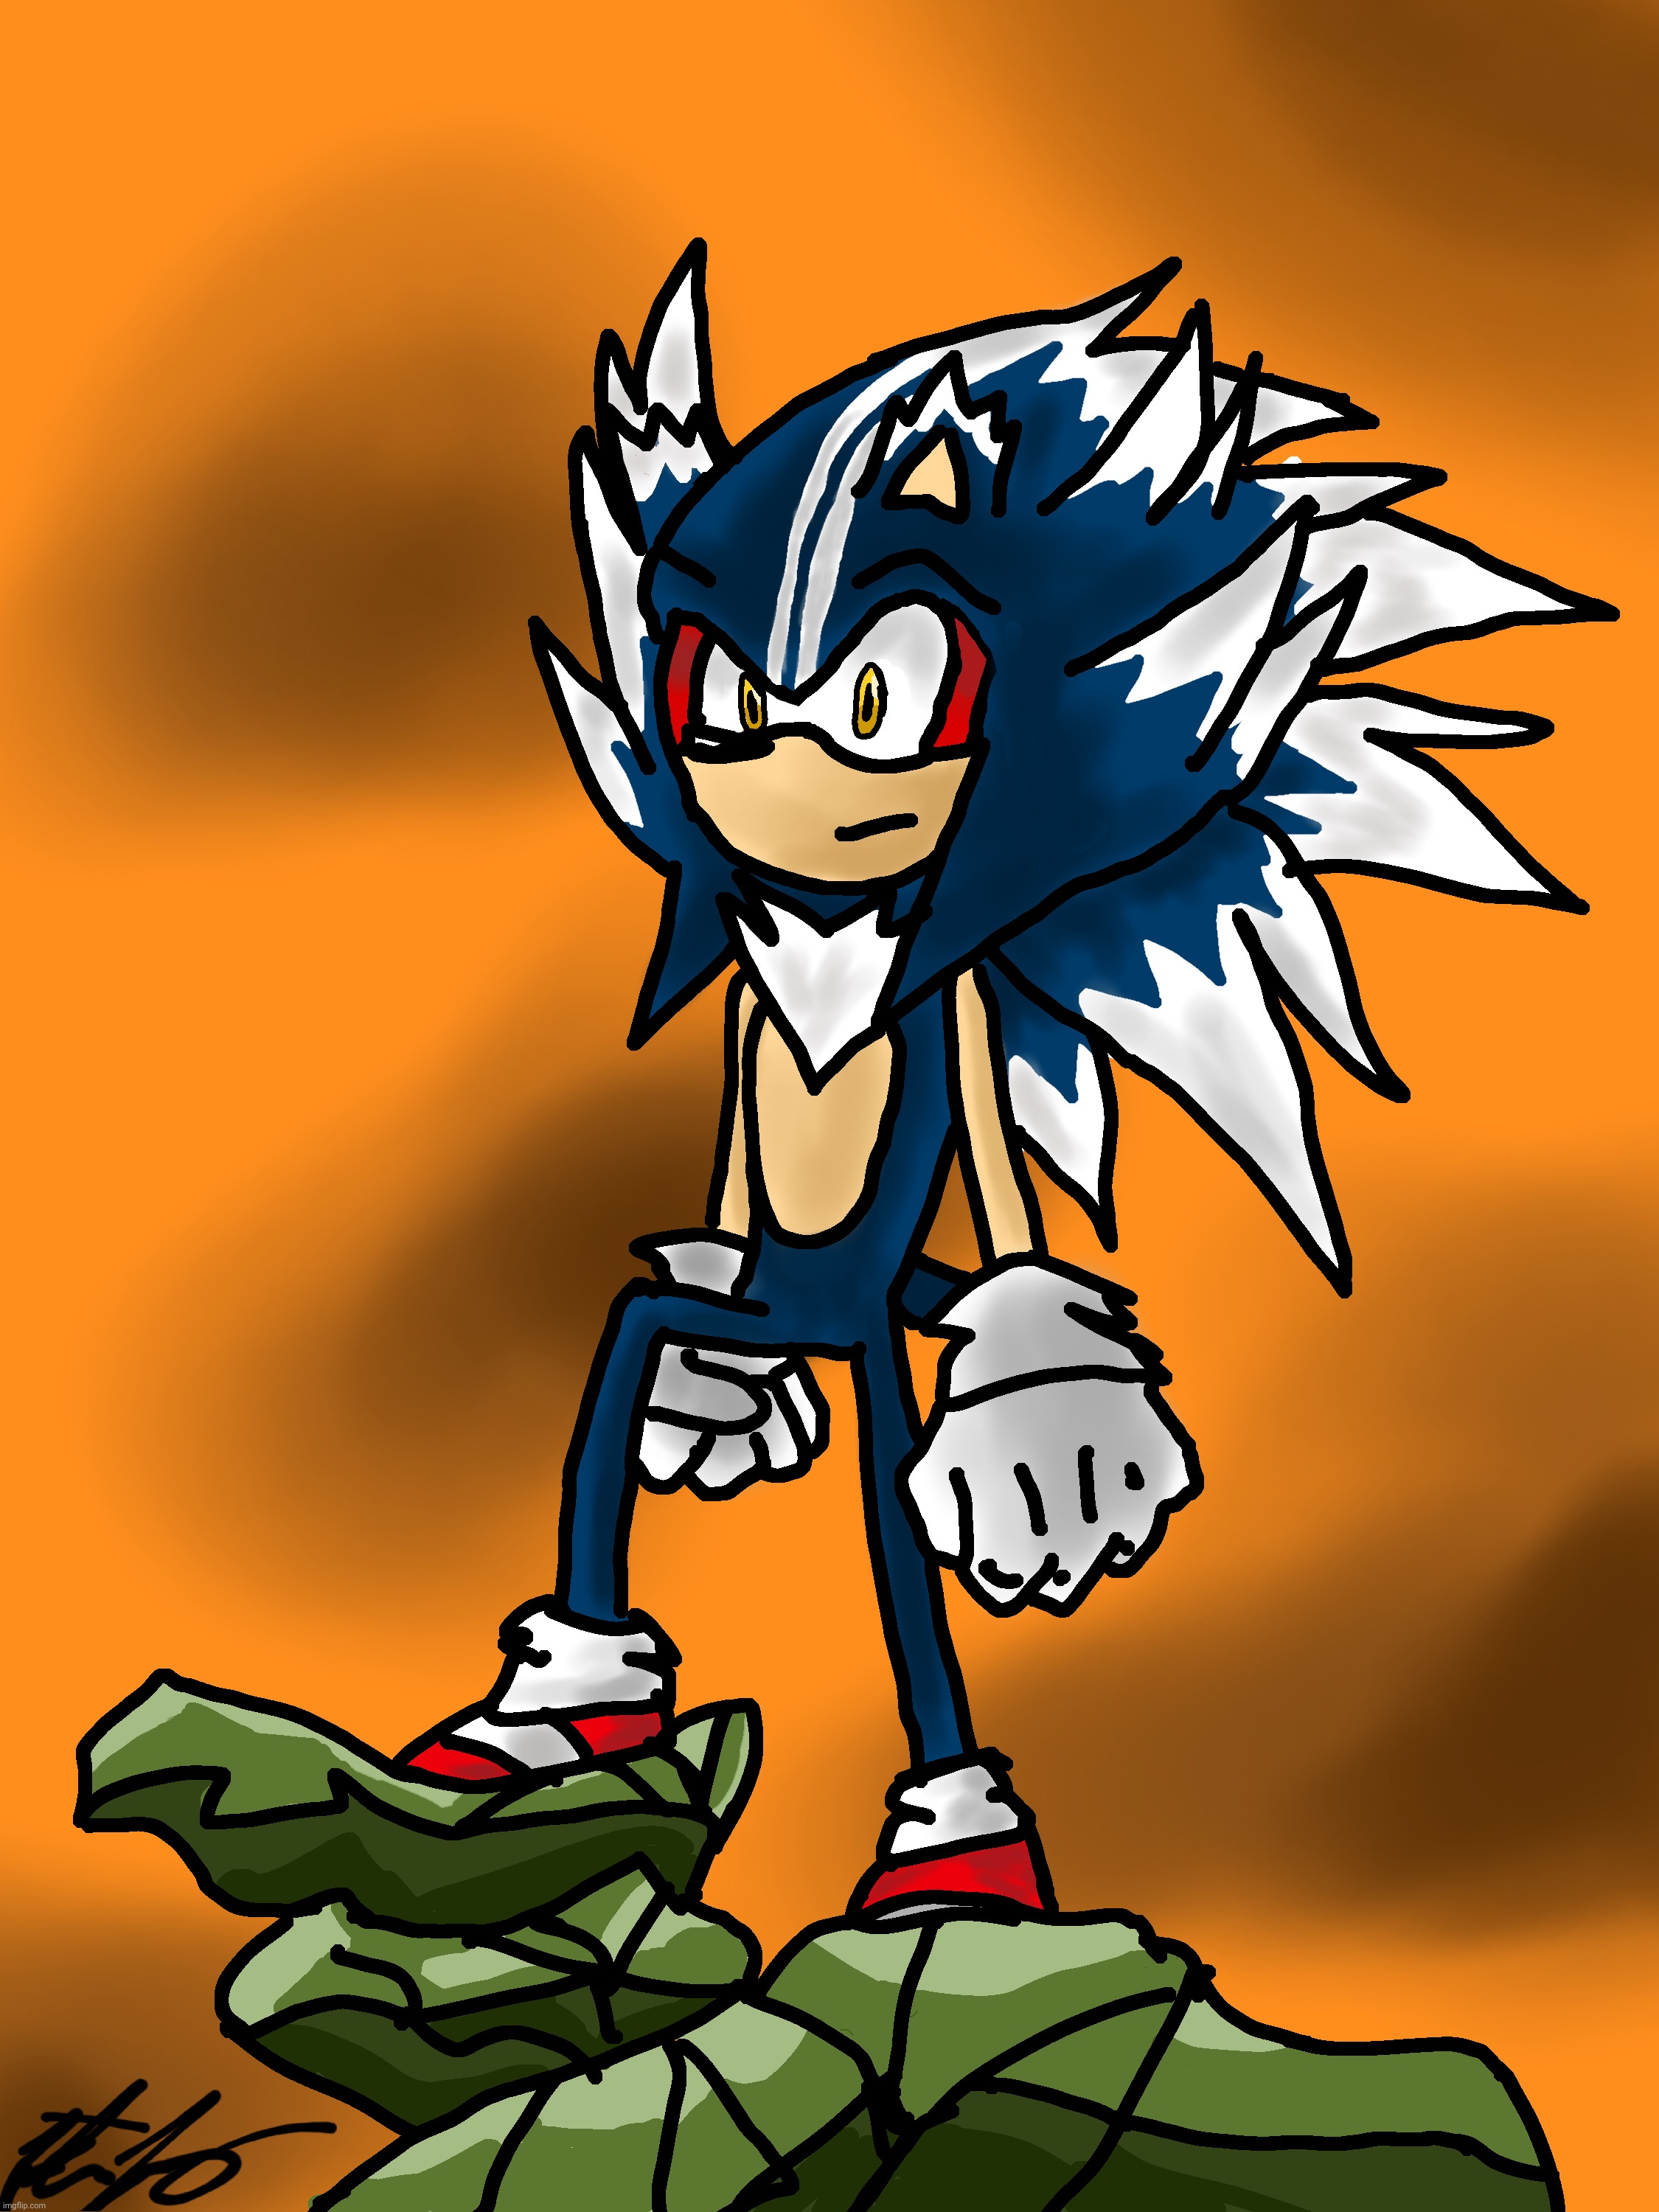 Super Sonic 4 | image tagged in sonic the hedgehog,sonic,drawing,digital art | made w/ Imgflip meme maker